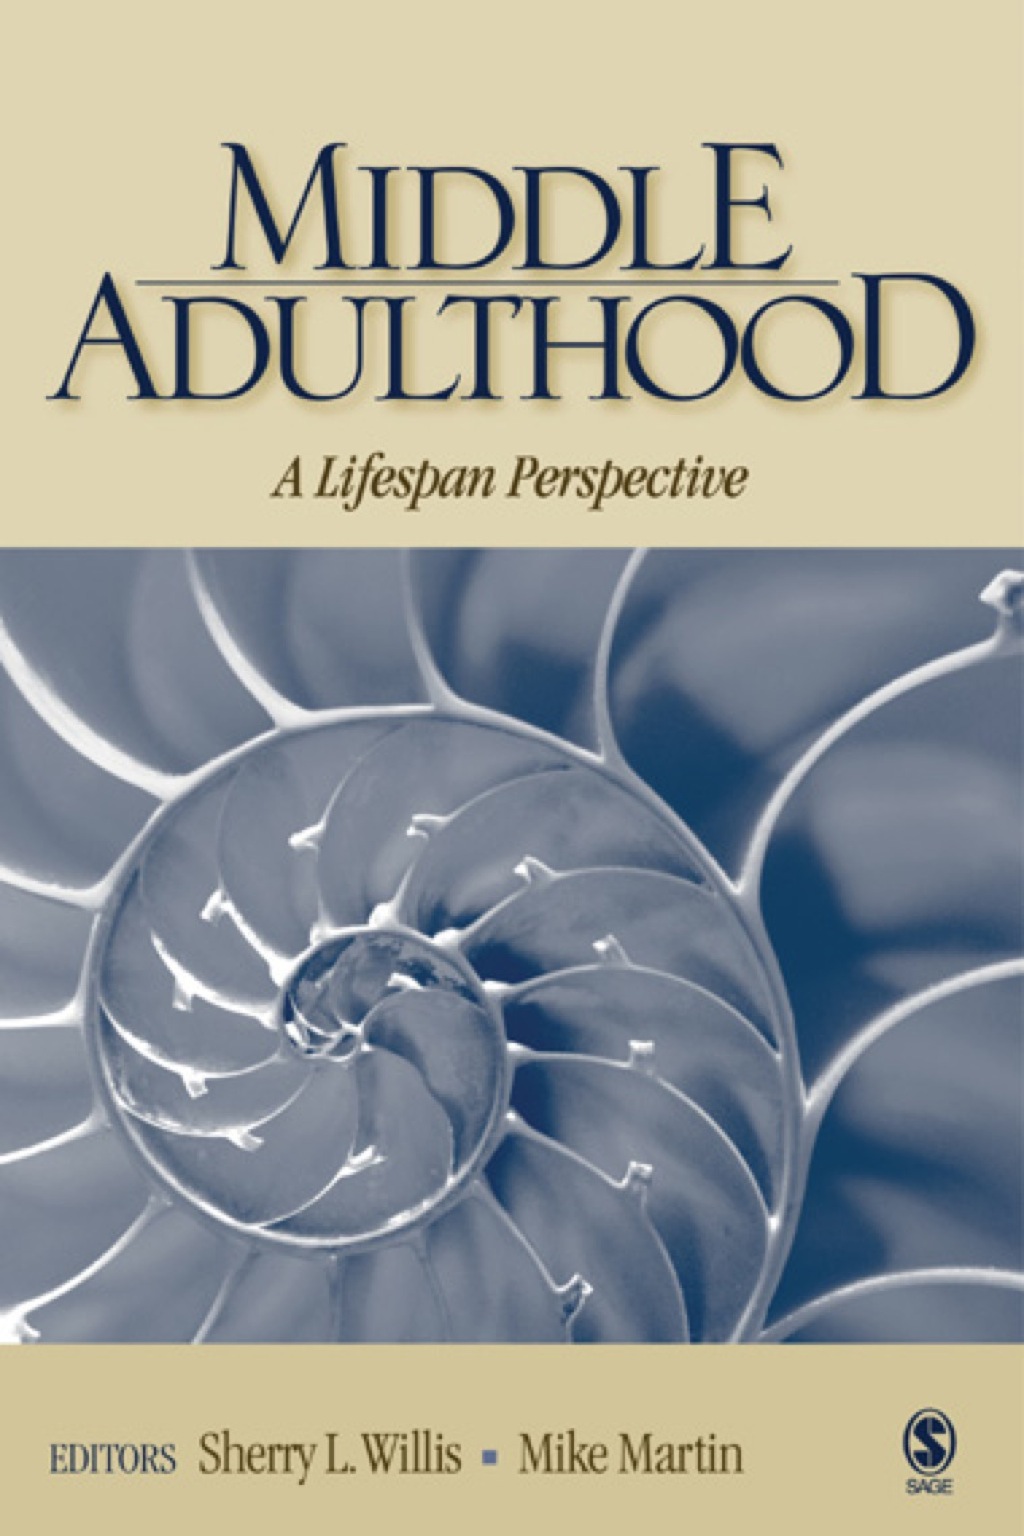 Middle Adulthood: A Lifespan Perspective (eBook) - Sherry L. Willis; Mike Martin